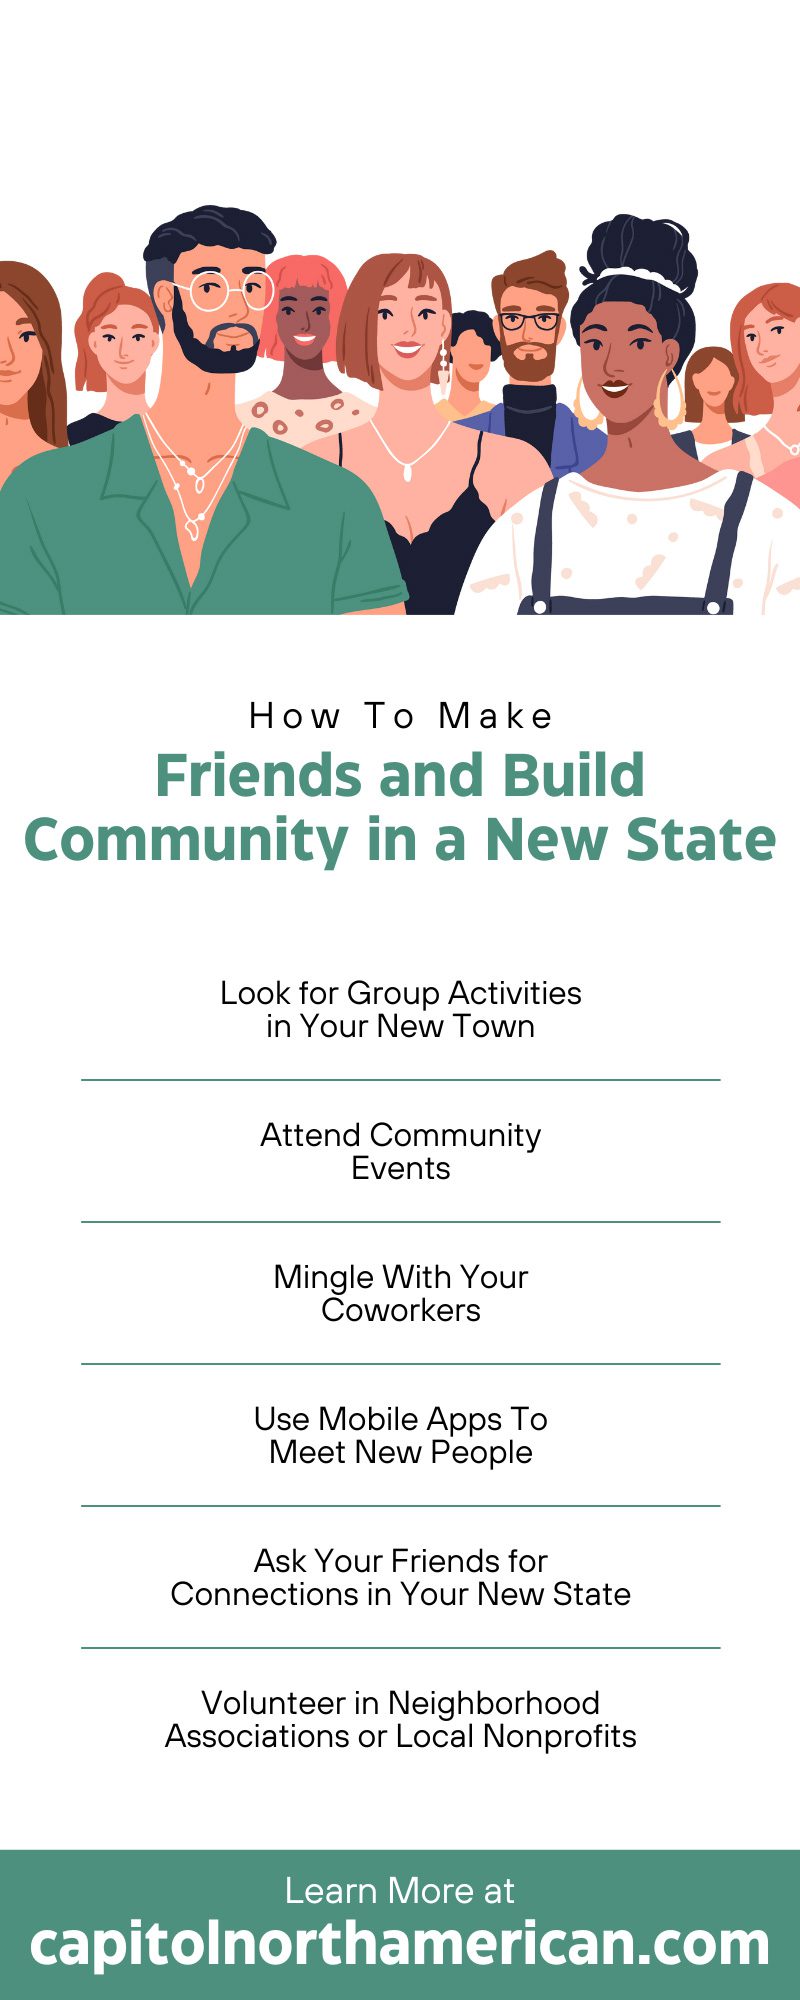 How To Make Friends and Build Community in a New State